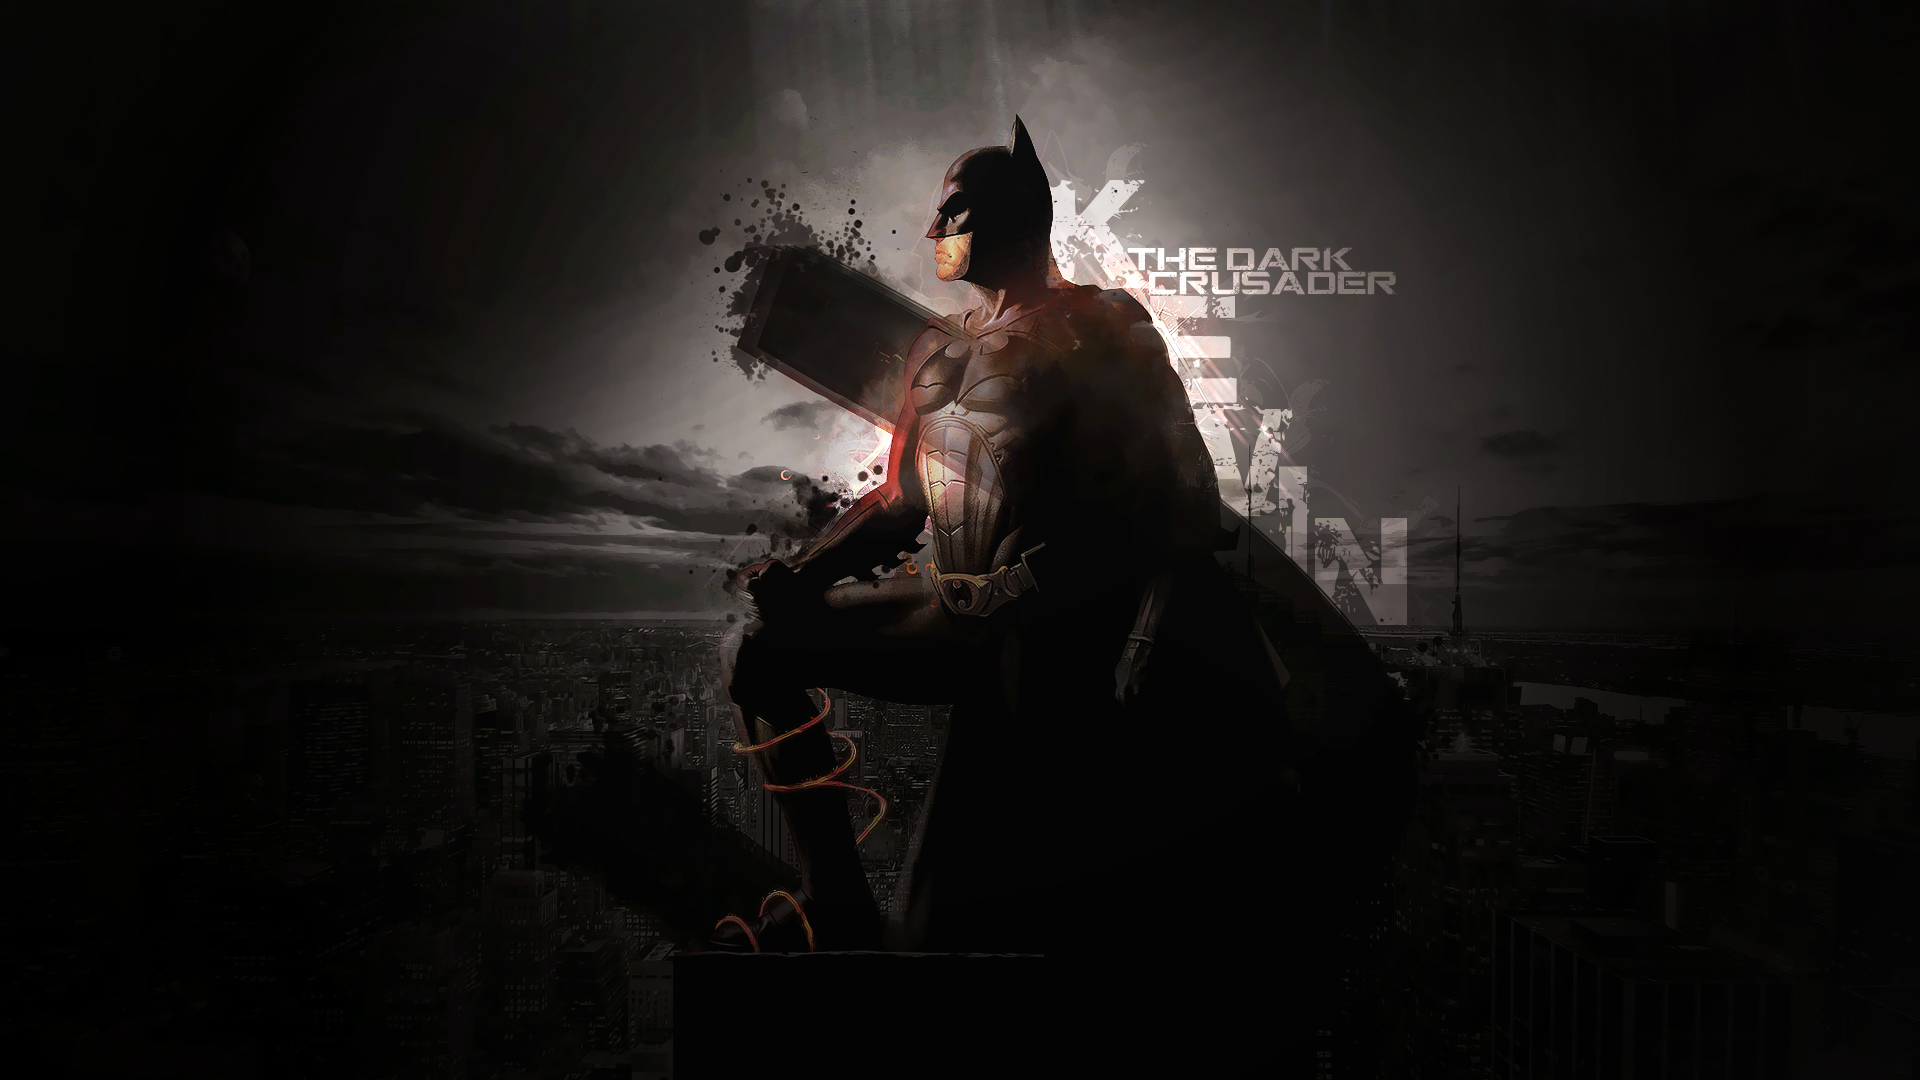 Check this out our new Batman wallpaper Batman wallpapers